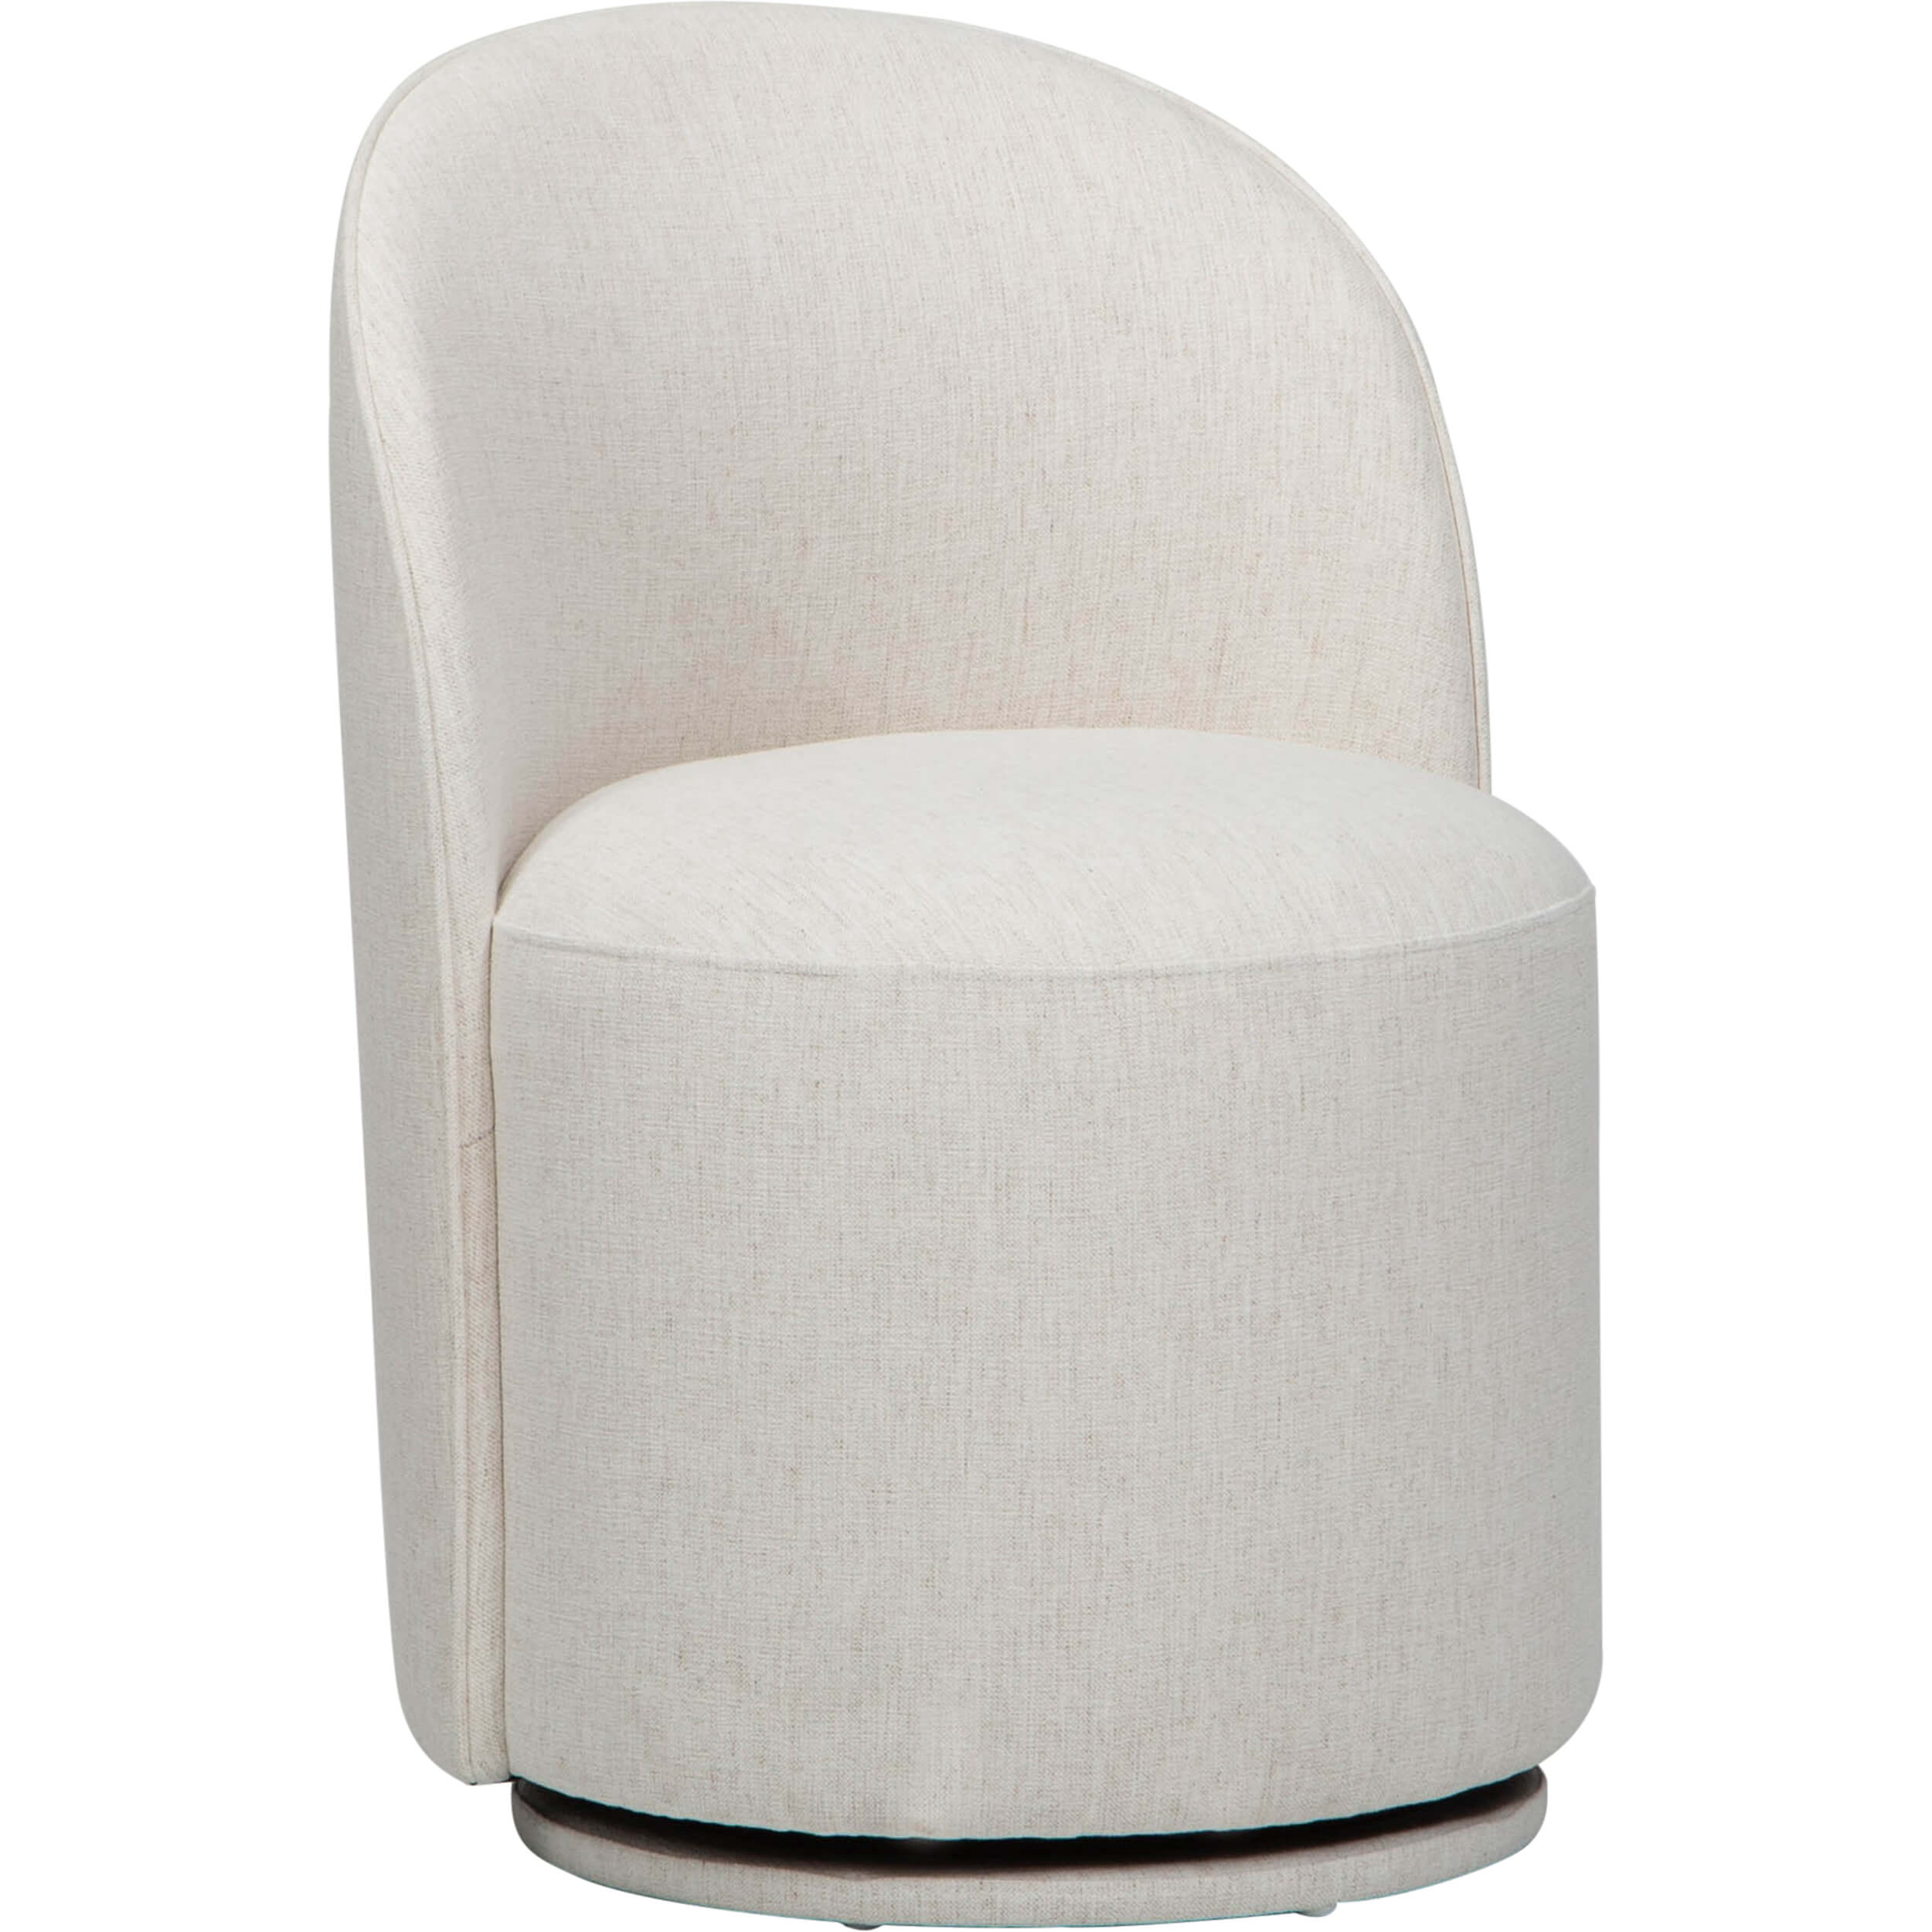 Image of Rory Swivel Dining Chair, Nomad Snow, Set of 2